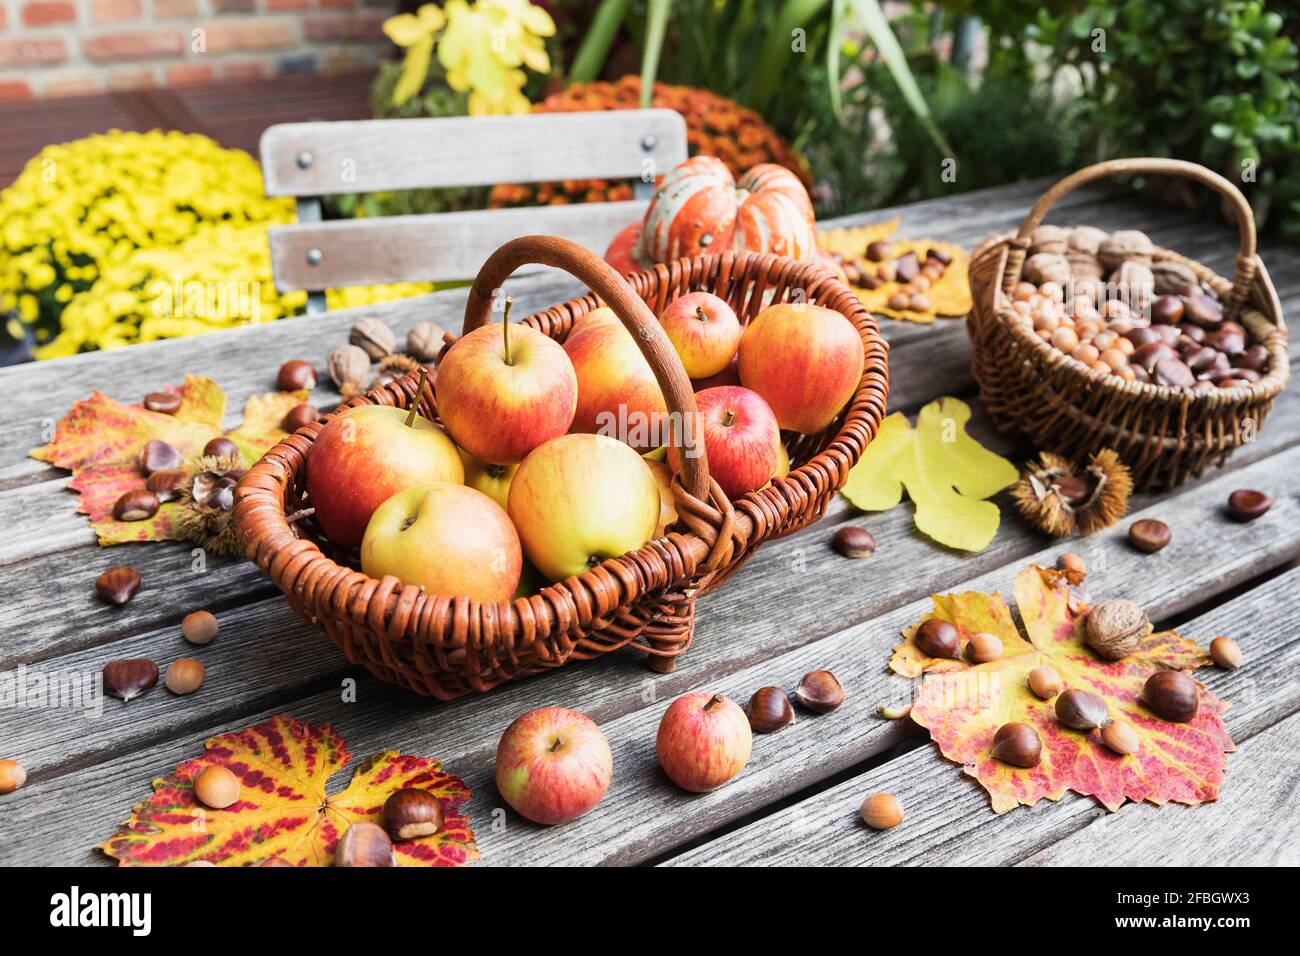 Autumn harvest on garden table: apples, nuts and chestnuts in baskets and edible pumpkin Stock Photo